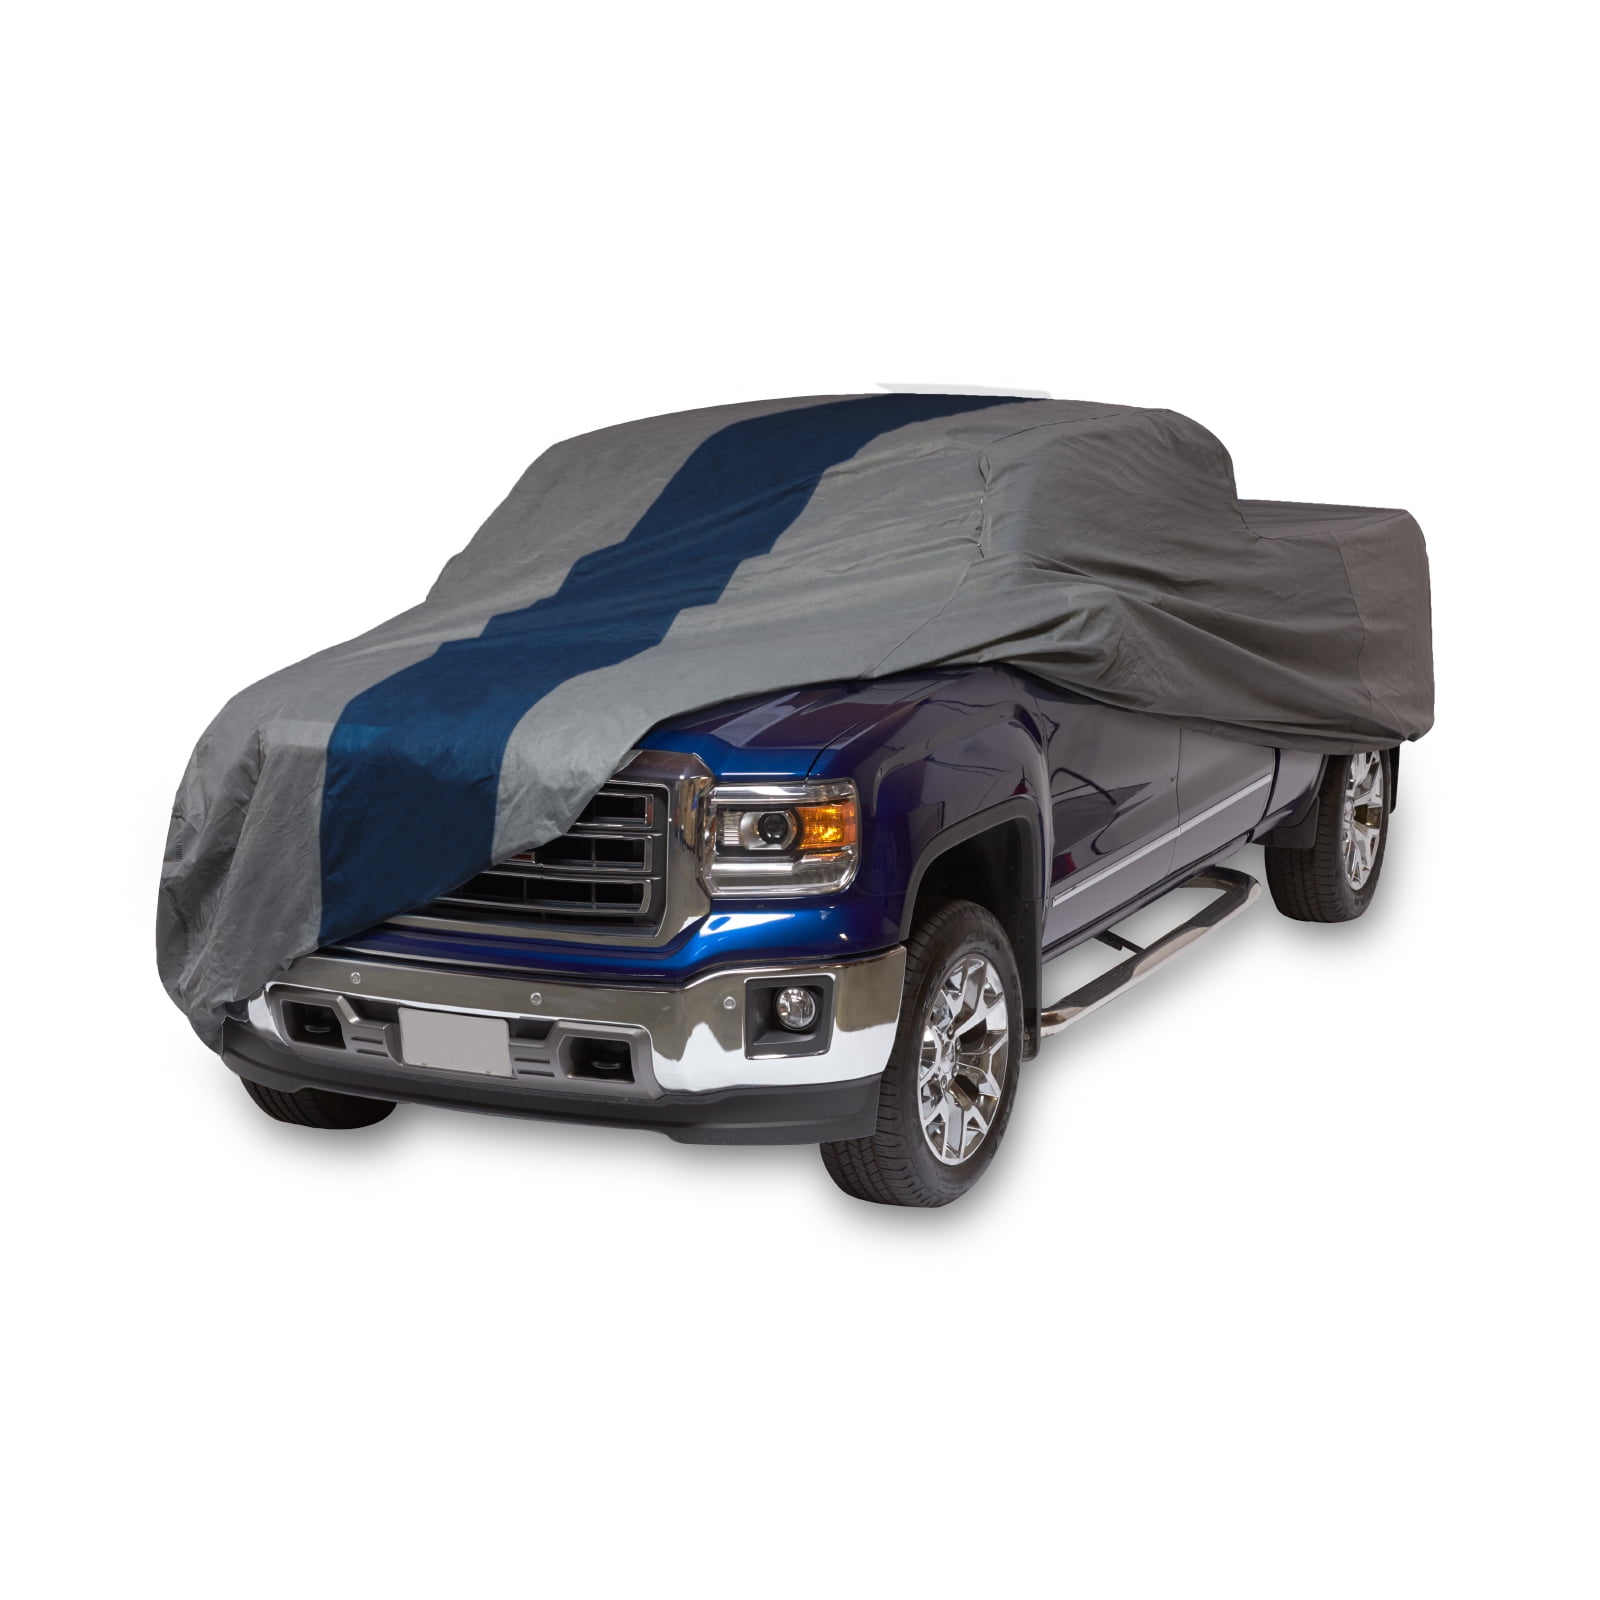 Waterproof Budge Rain Barrier Truck Cover Fits Long Bed Crew Cab up to 22' Long 